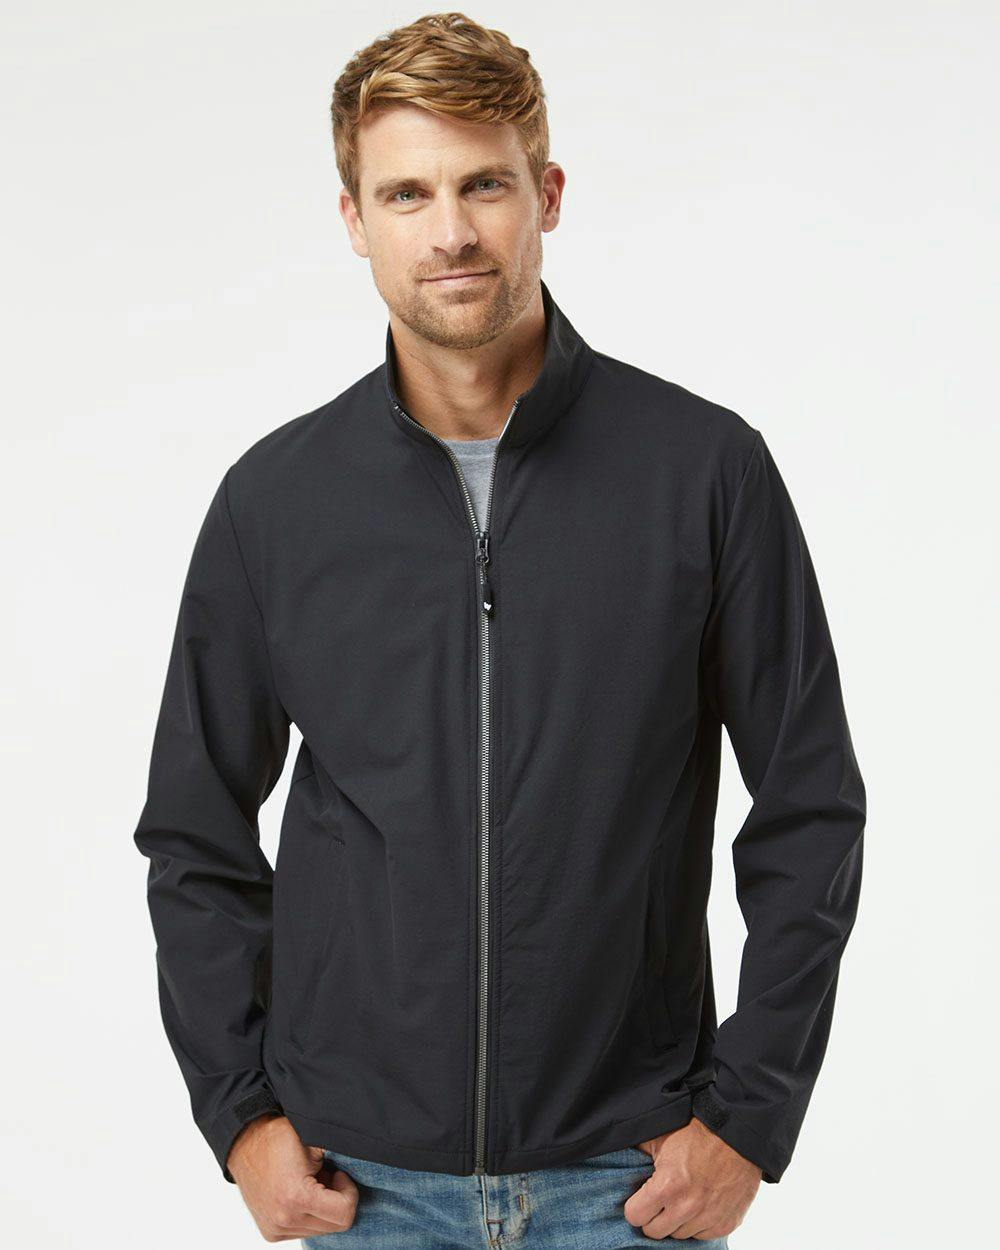 Image for CoolLast™ Performax Jacket - 22720